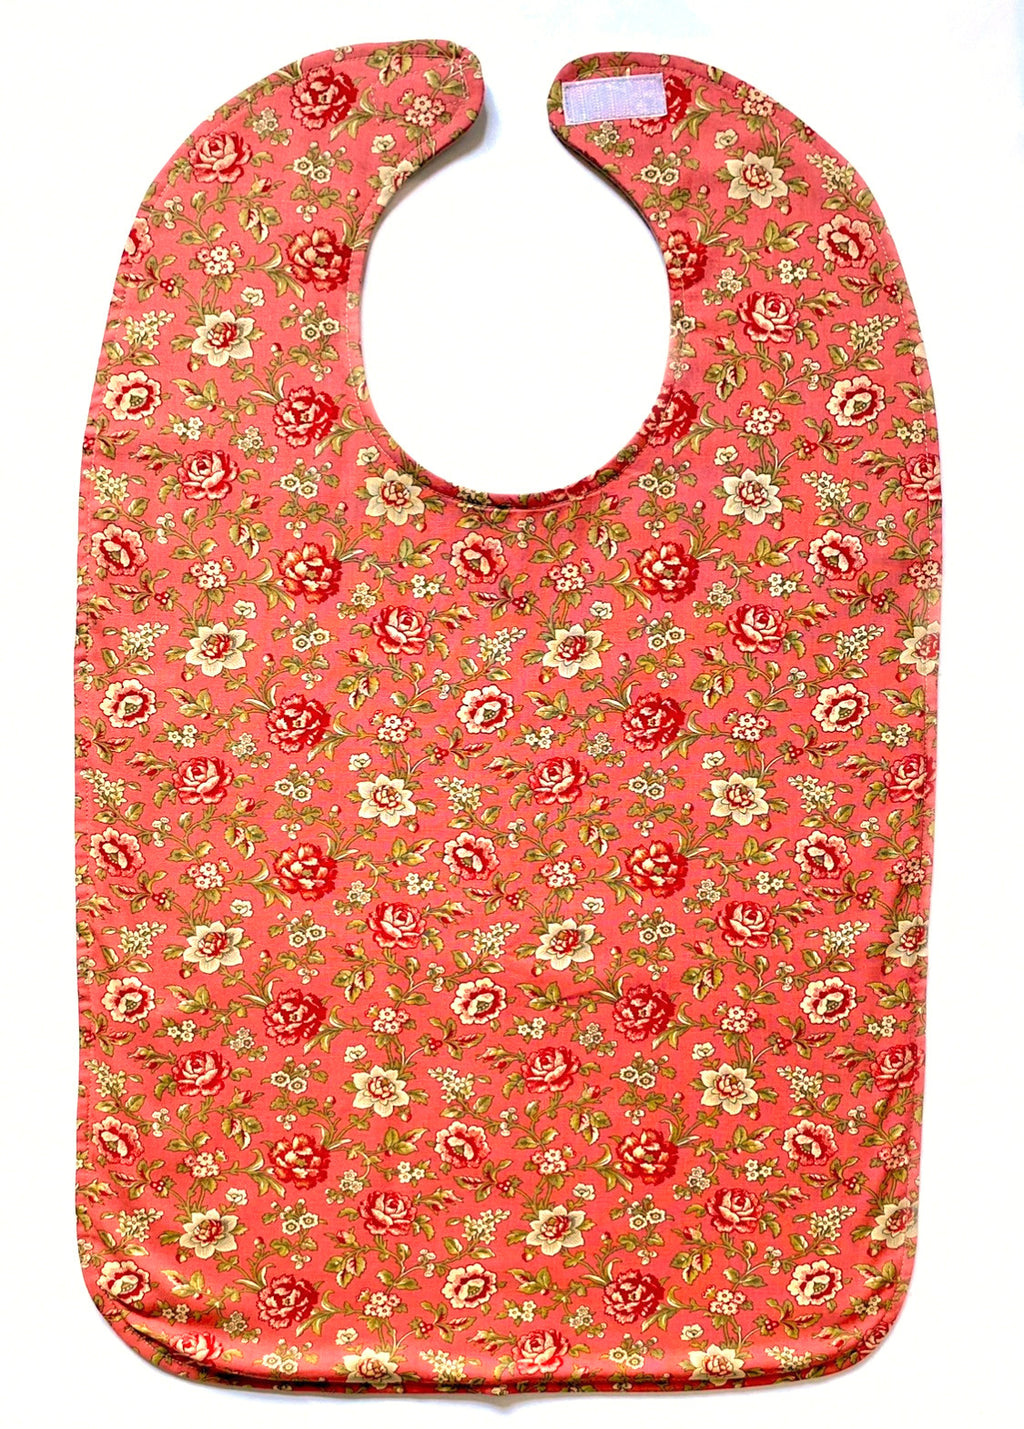 Dusty rose BAVETTE adult bib with small beige and red roses, and three layers of machine washable premium cotton, Velcro back closure, 26" x 17" 